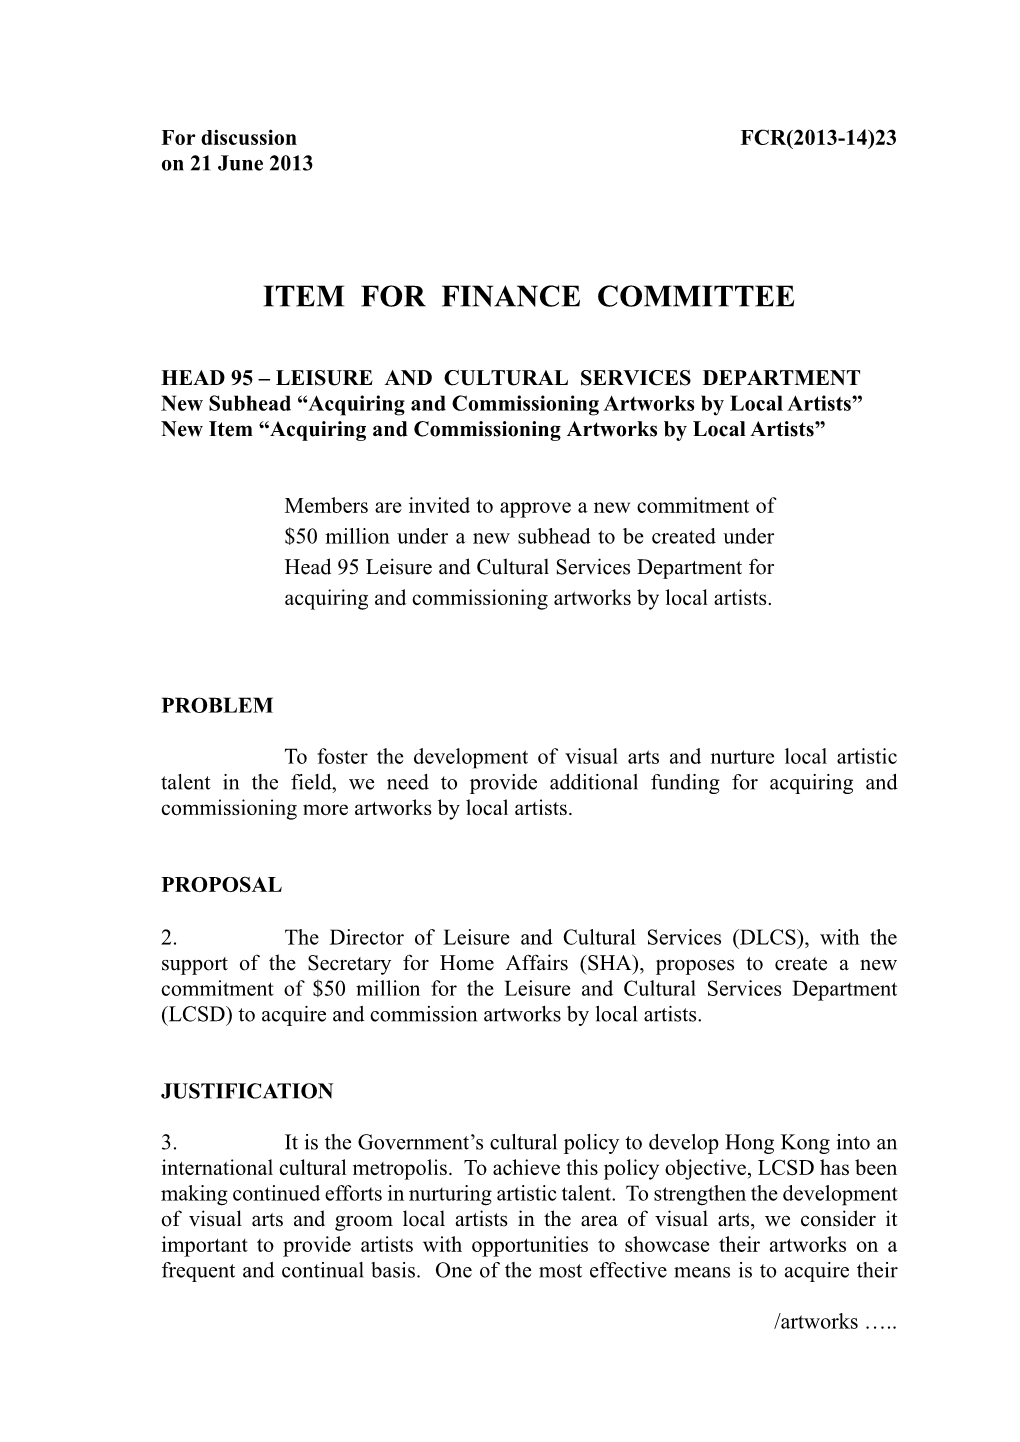 Item for Finance Committee